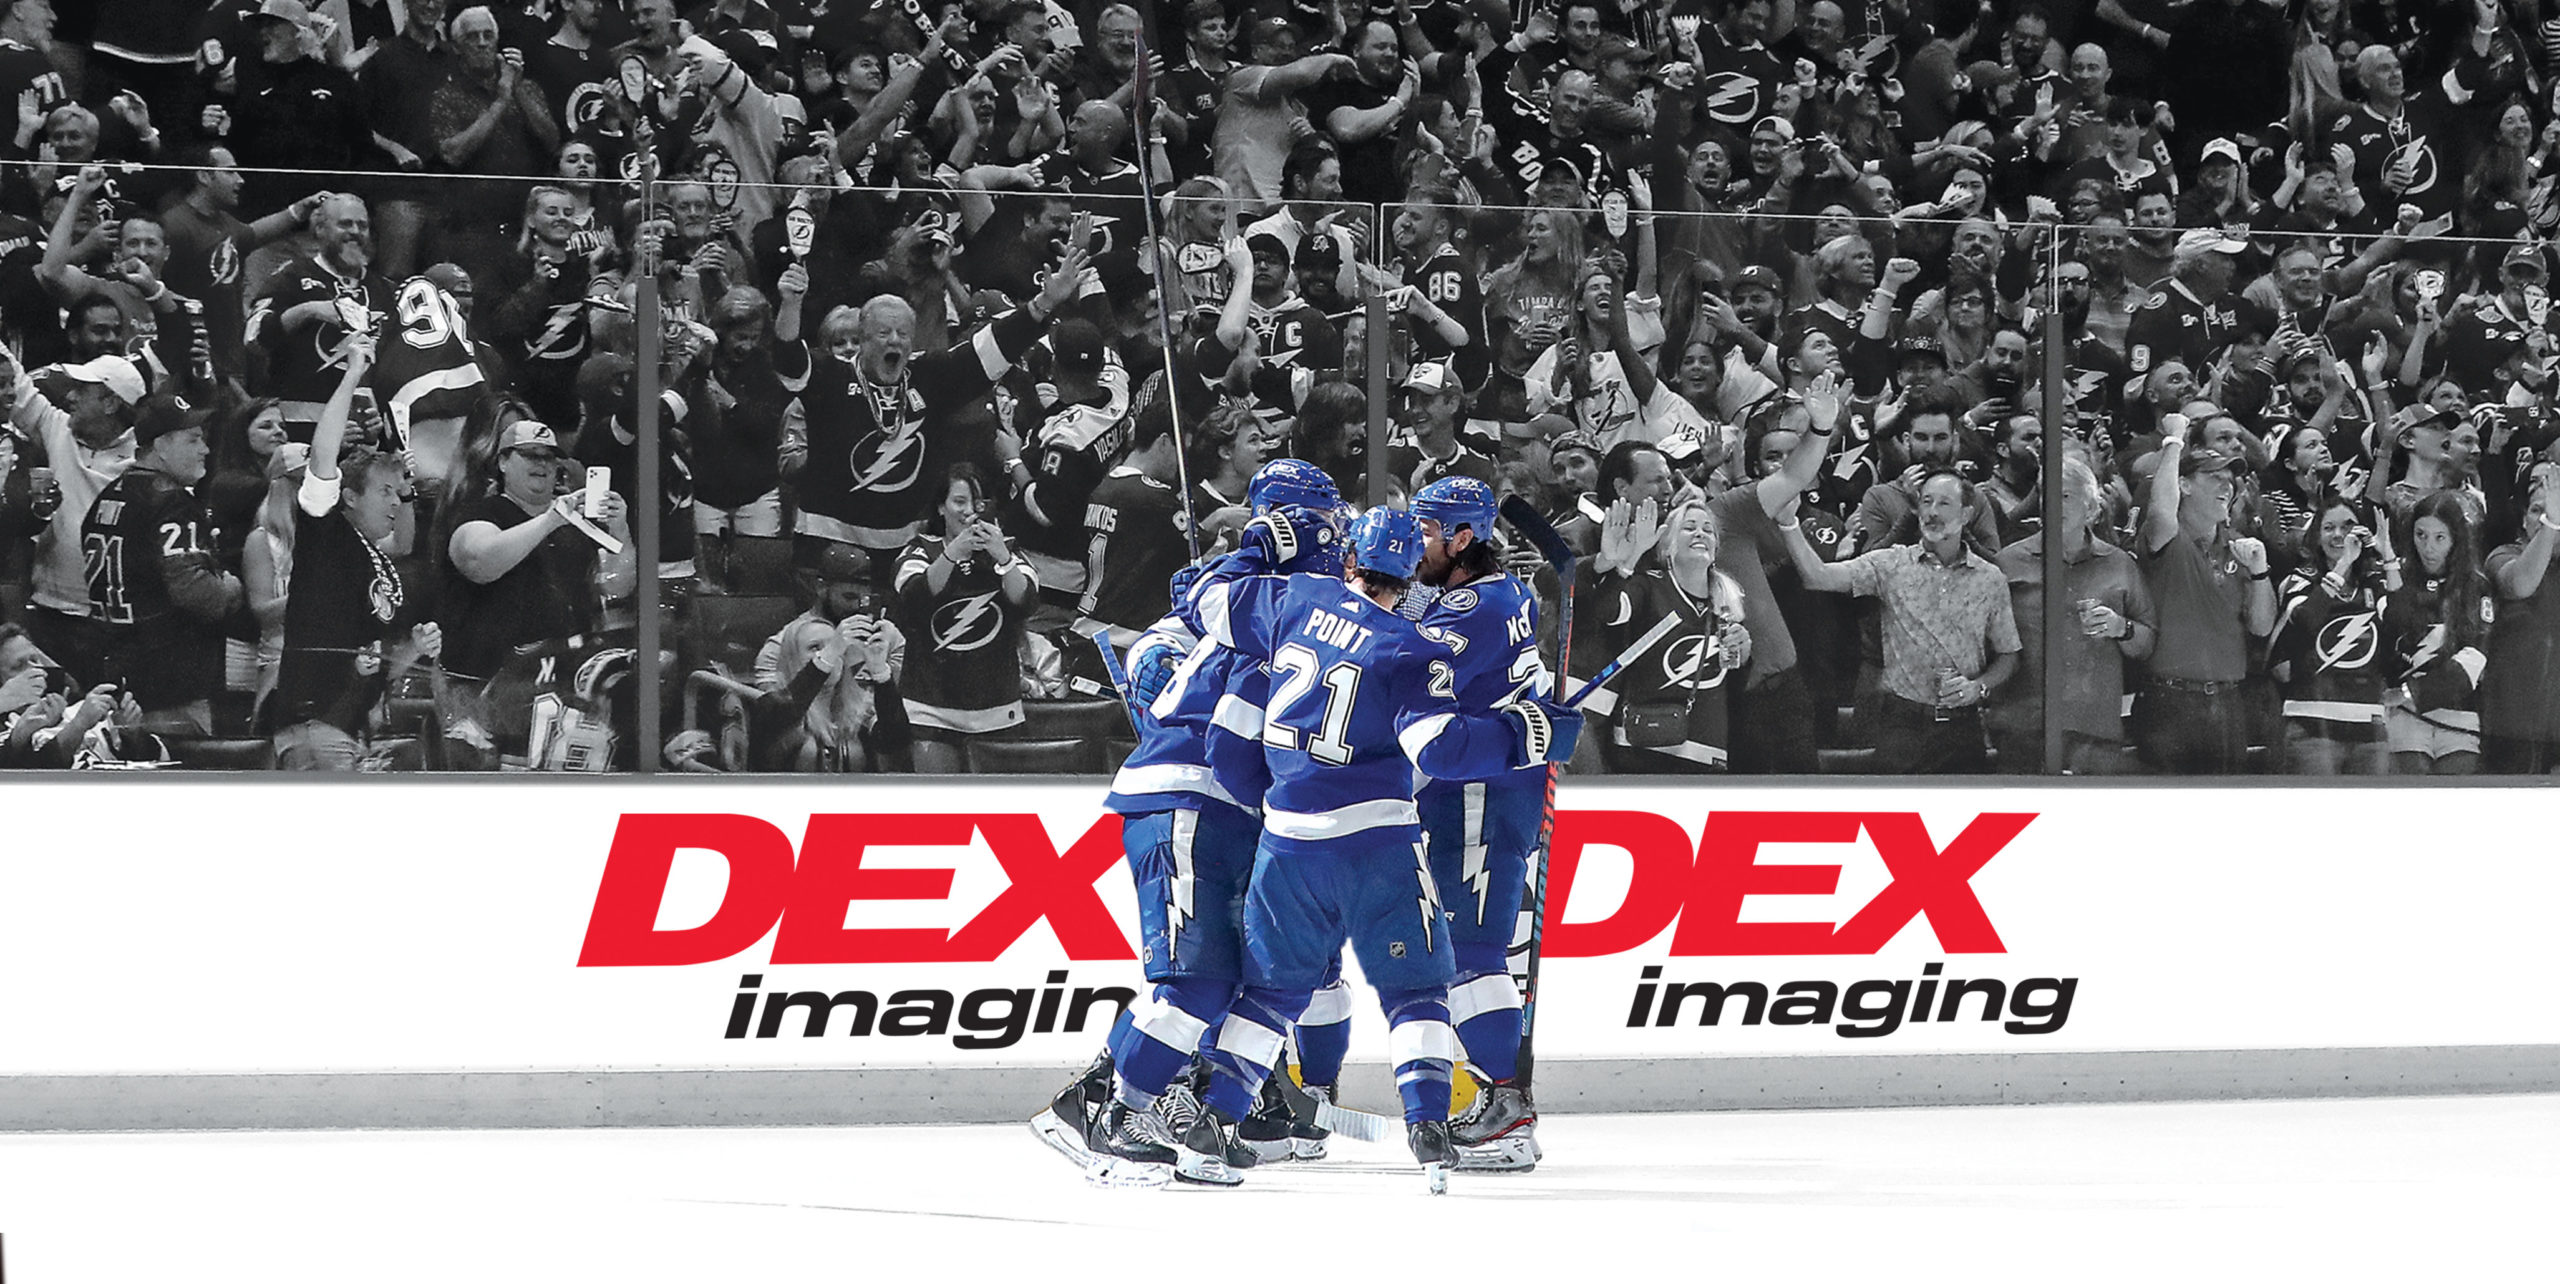 Celebration of Tampa Bay Lightning players in front of a DEX Imaging banner after winning the Stanley Cup